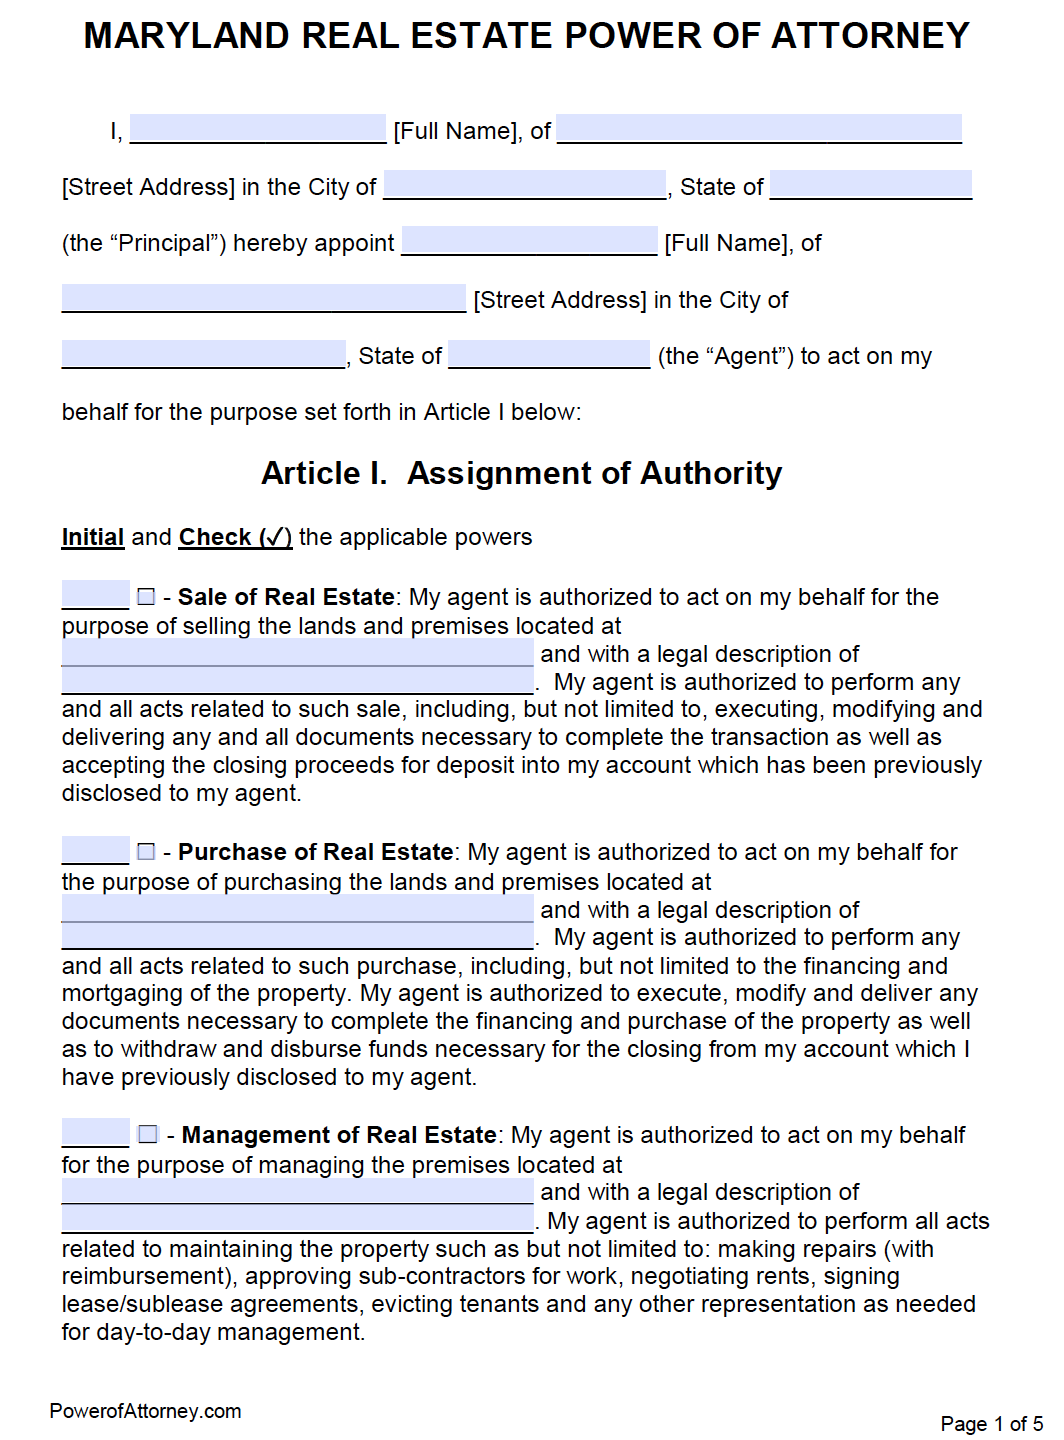 Free Maryland Power Of Attorney Forms Pdf Templates